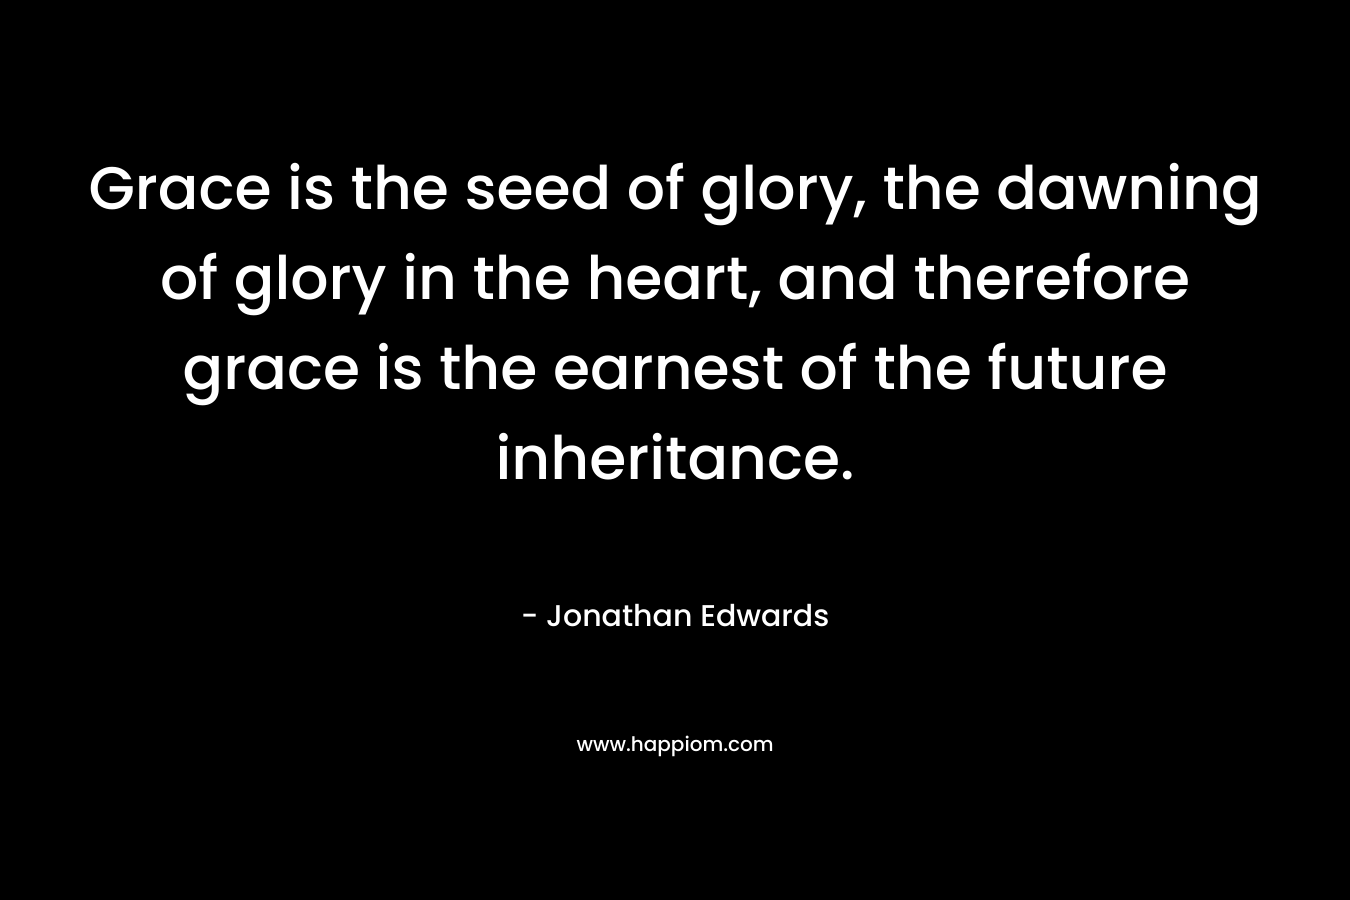 Grace is the seed of glory, the dawning of glory in the heart, and therefore grace is the earnest of the future inheritance. – Jonathan Edwards